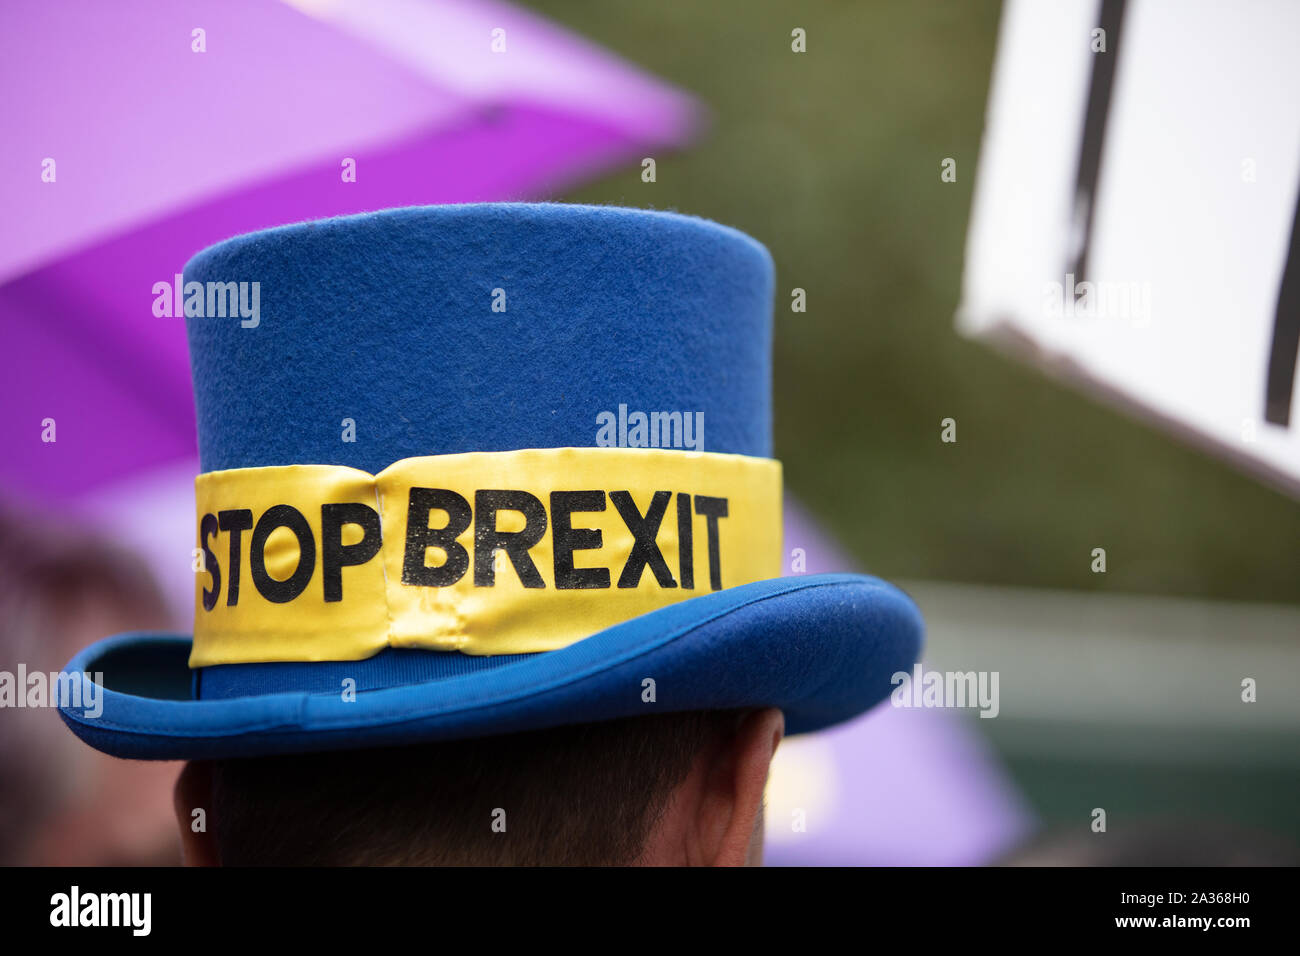 Well known blue hat from anti-Brexit protester Steve Bray seen on Parliament Square, London. Stock Photo